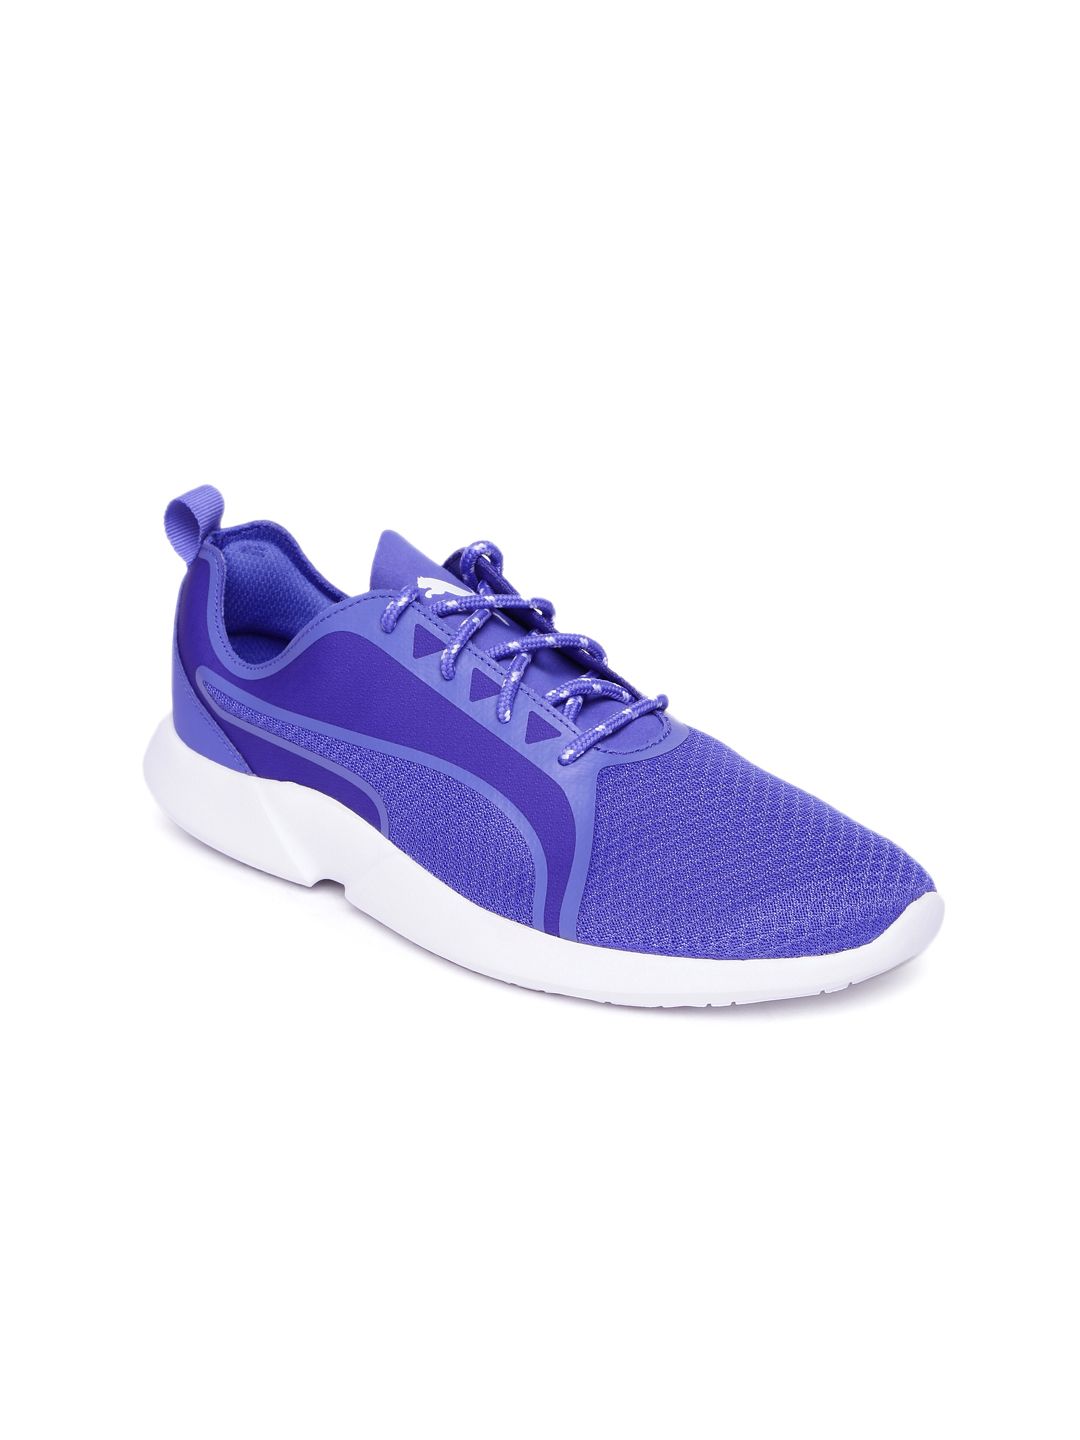 Puma Karlie Dp Purple Sporty Sneakers for women - Get stylish shoes for ...